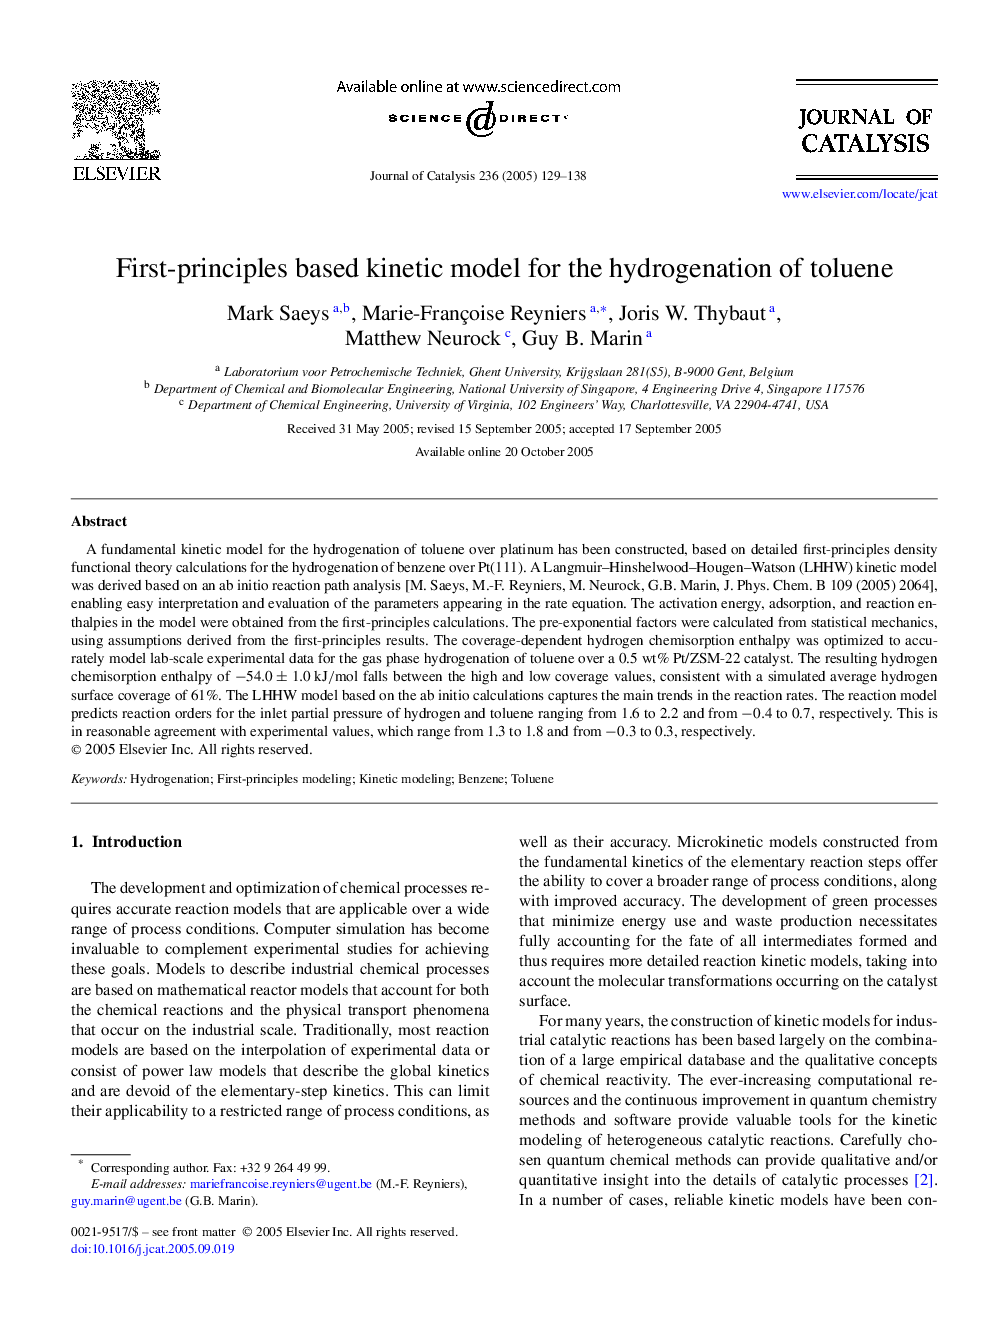 First-principles based kinetic model for the hydrogenation of toluene